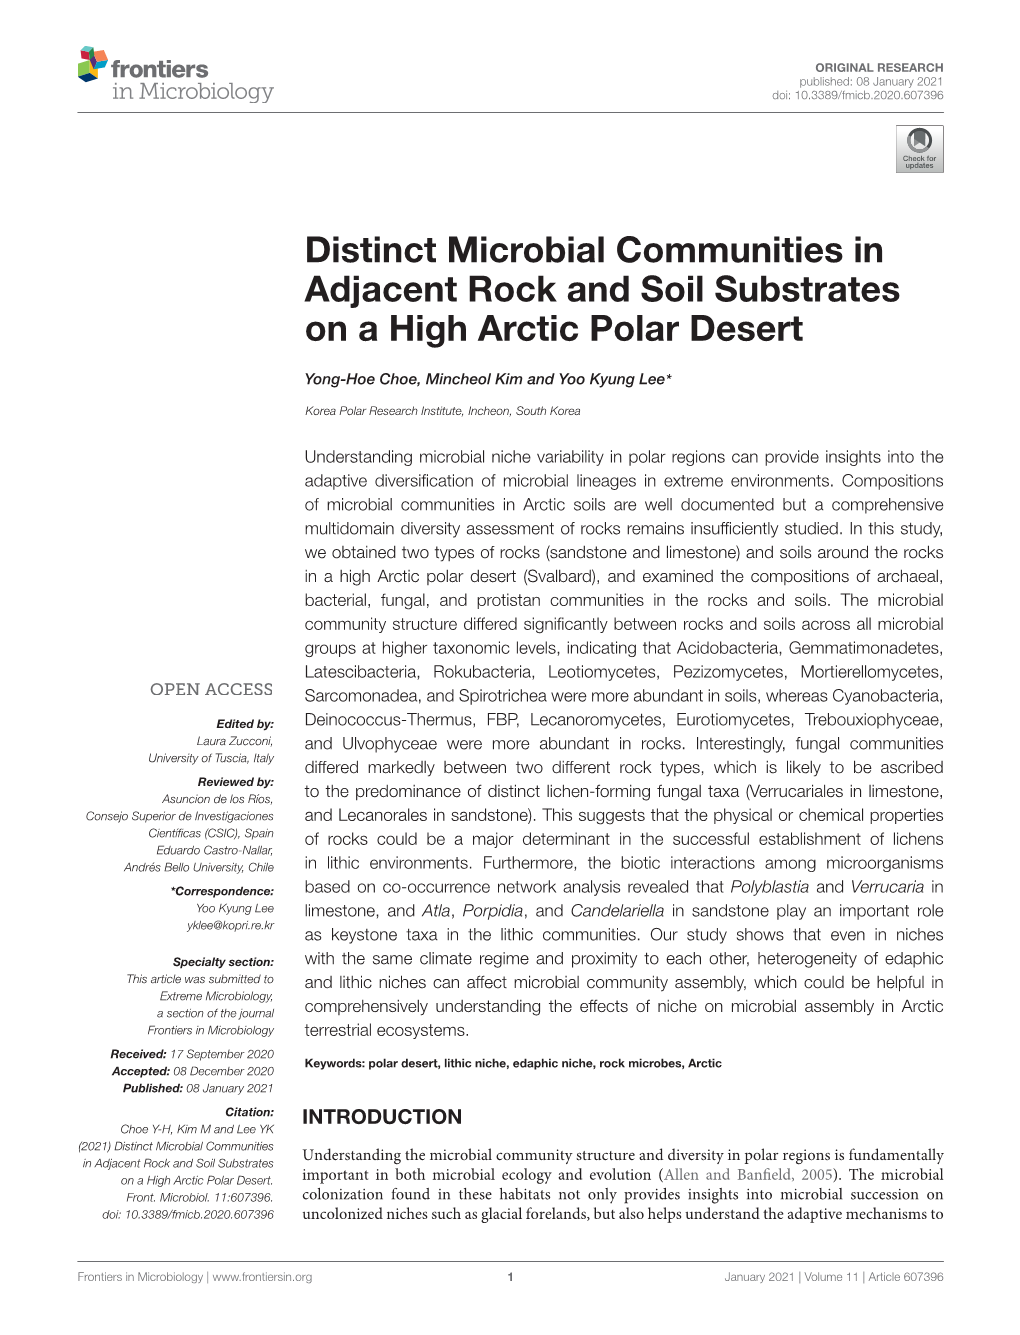 Distinct Microbial Communities in Adjacent Rock and Soil Substrates on a High Arctic Polar Desert